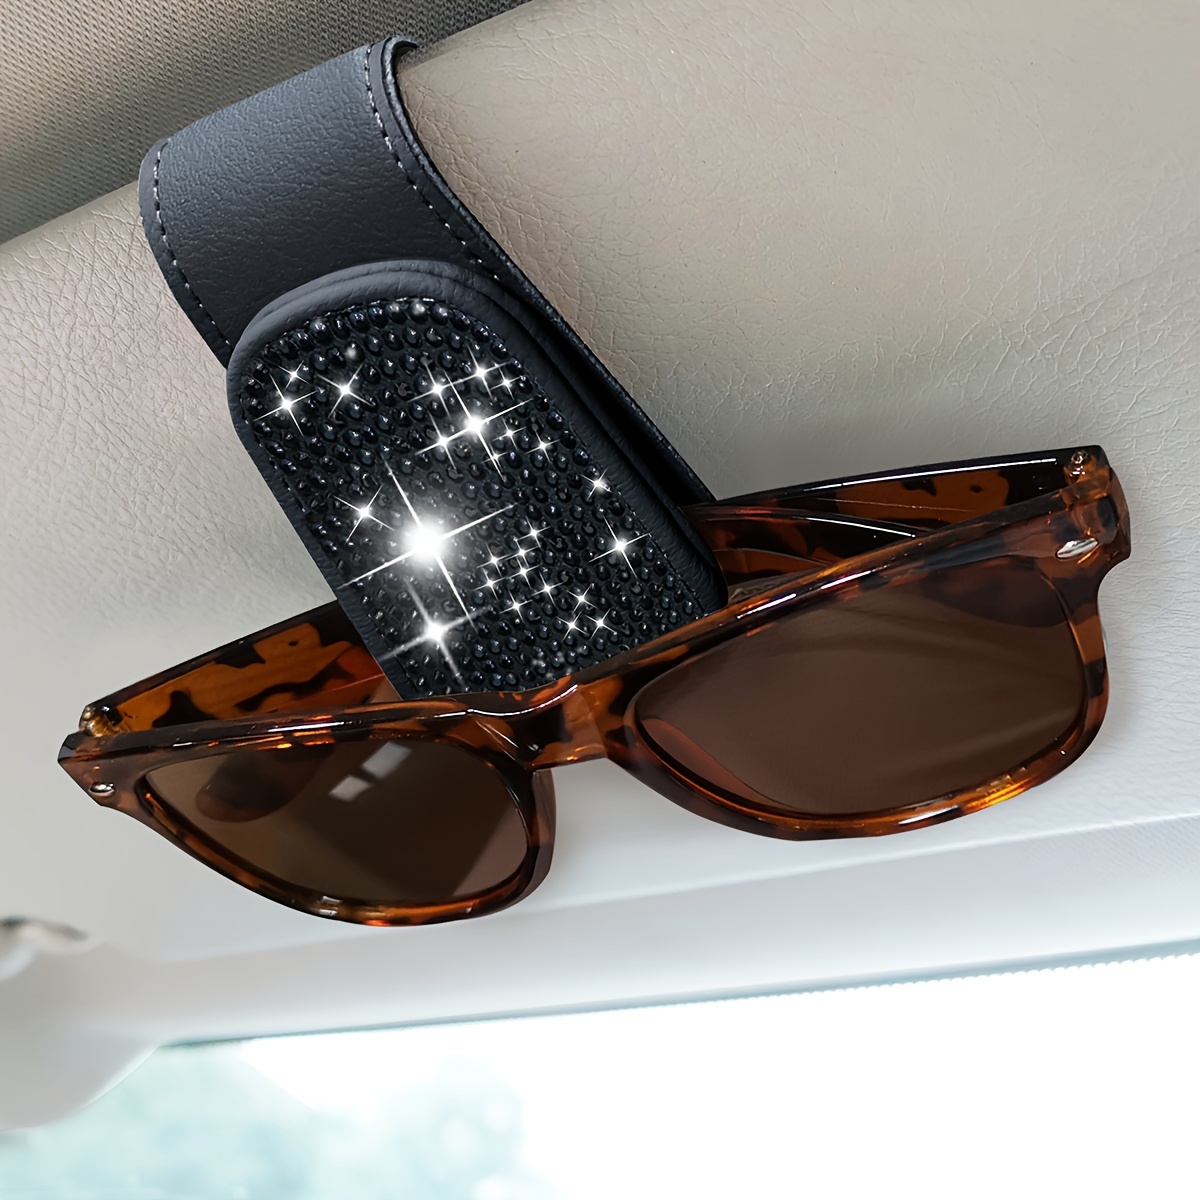 Sunglasses Glasses Clip for the Car, Suitable for the Sun Visor -   Canada